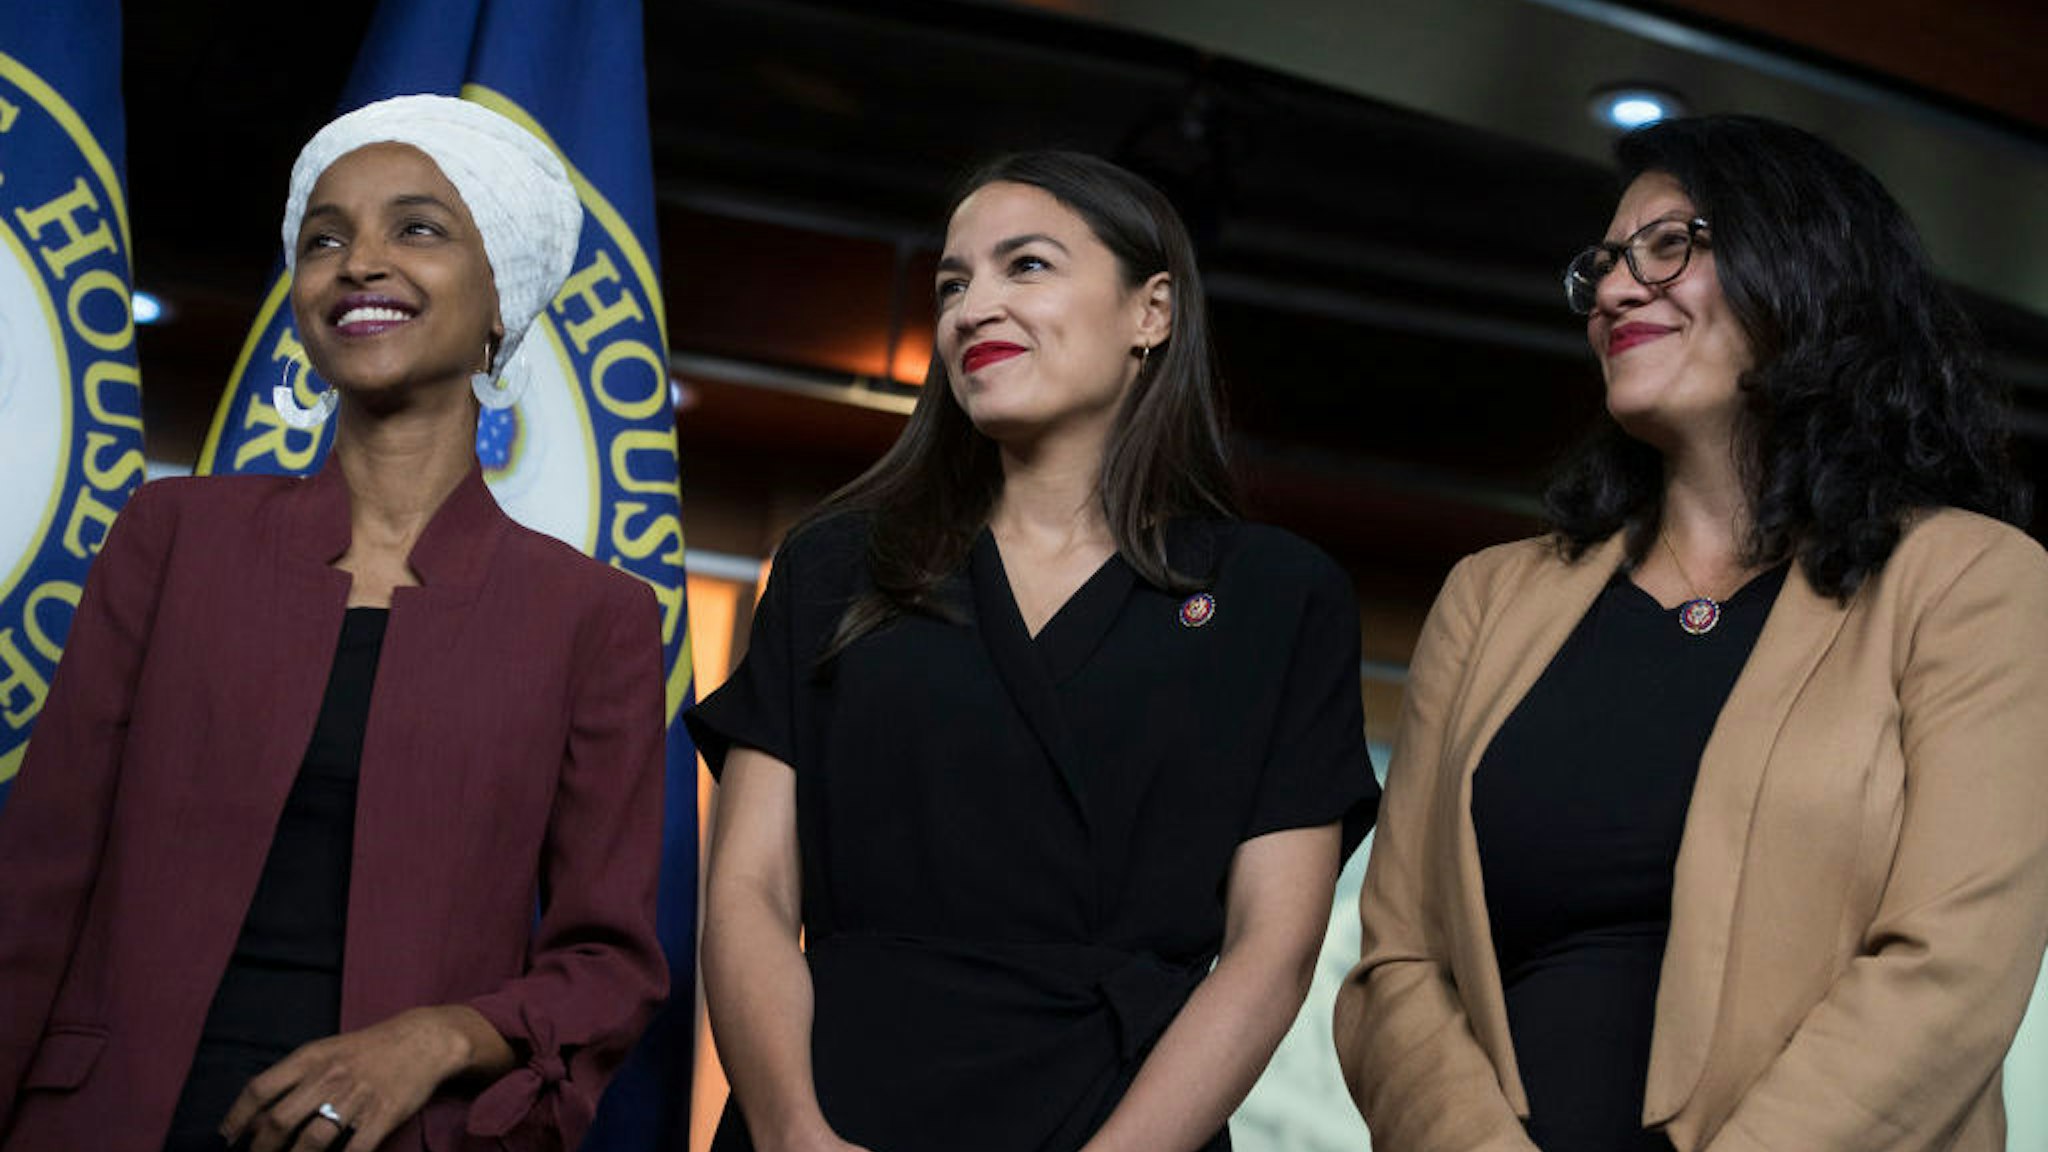 UNITED STATES - JULY 15: From left, Reps. Ilhan Omar, D-Minn., Alexandria Ocasio-Cortez, D-N.Y., and Rashida Tlaib, D-Mich., conduct a news conference in the Capitol Visitor Center responding to negative comments by President Trump that were directed at the freshman House Democrats on Monday, July 15, 2019. (Photo By Tom Williams/CQ Roll Call)